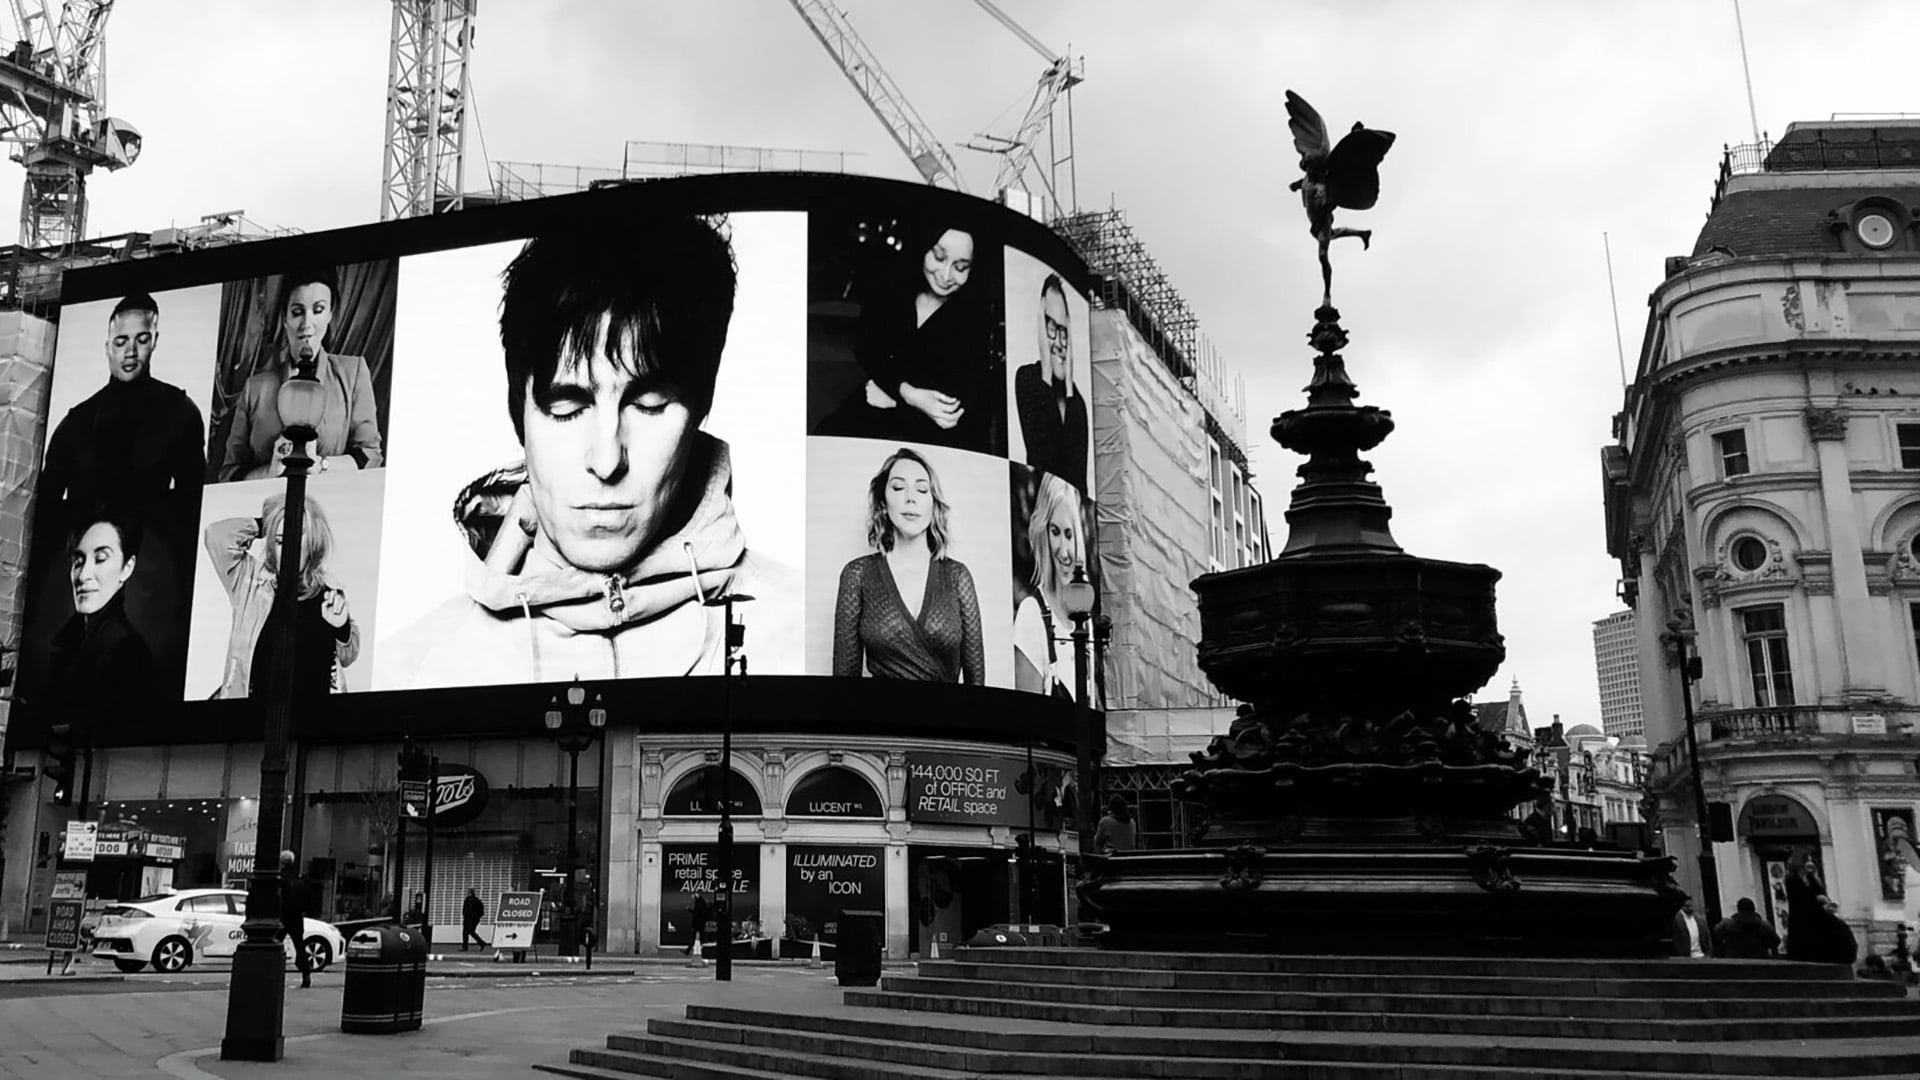 Art of London: Take a Moment montage of work in London featuring Liam Gallagher